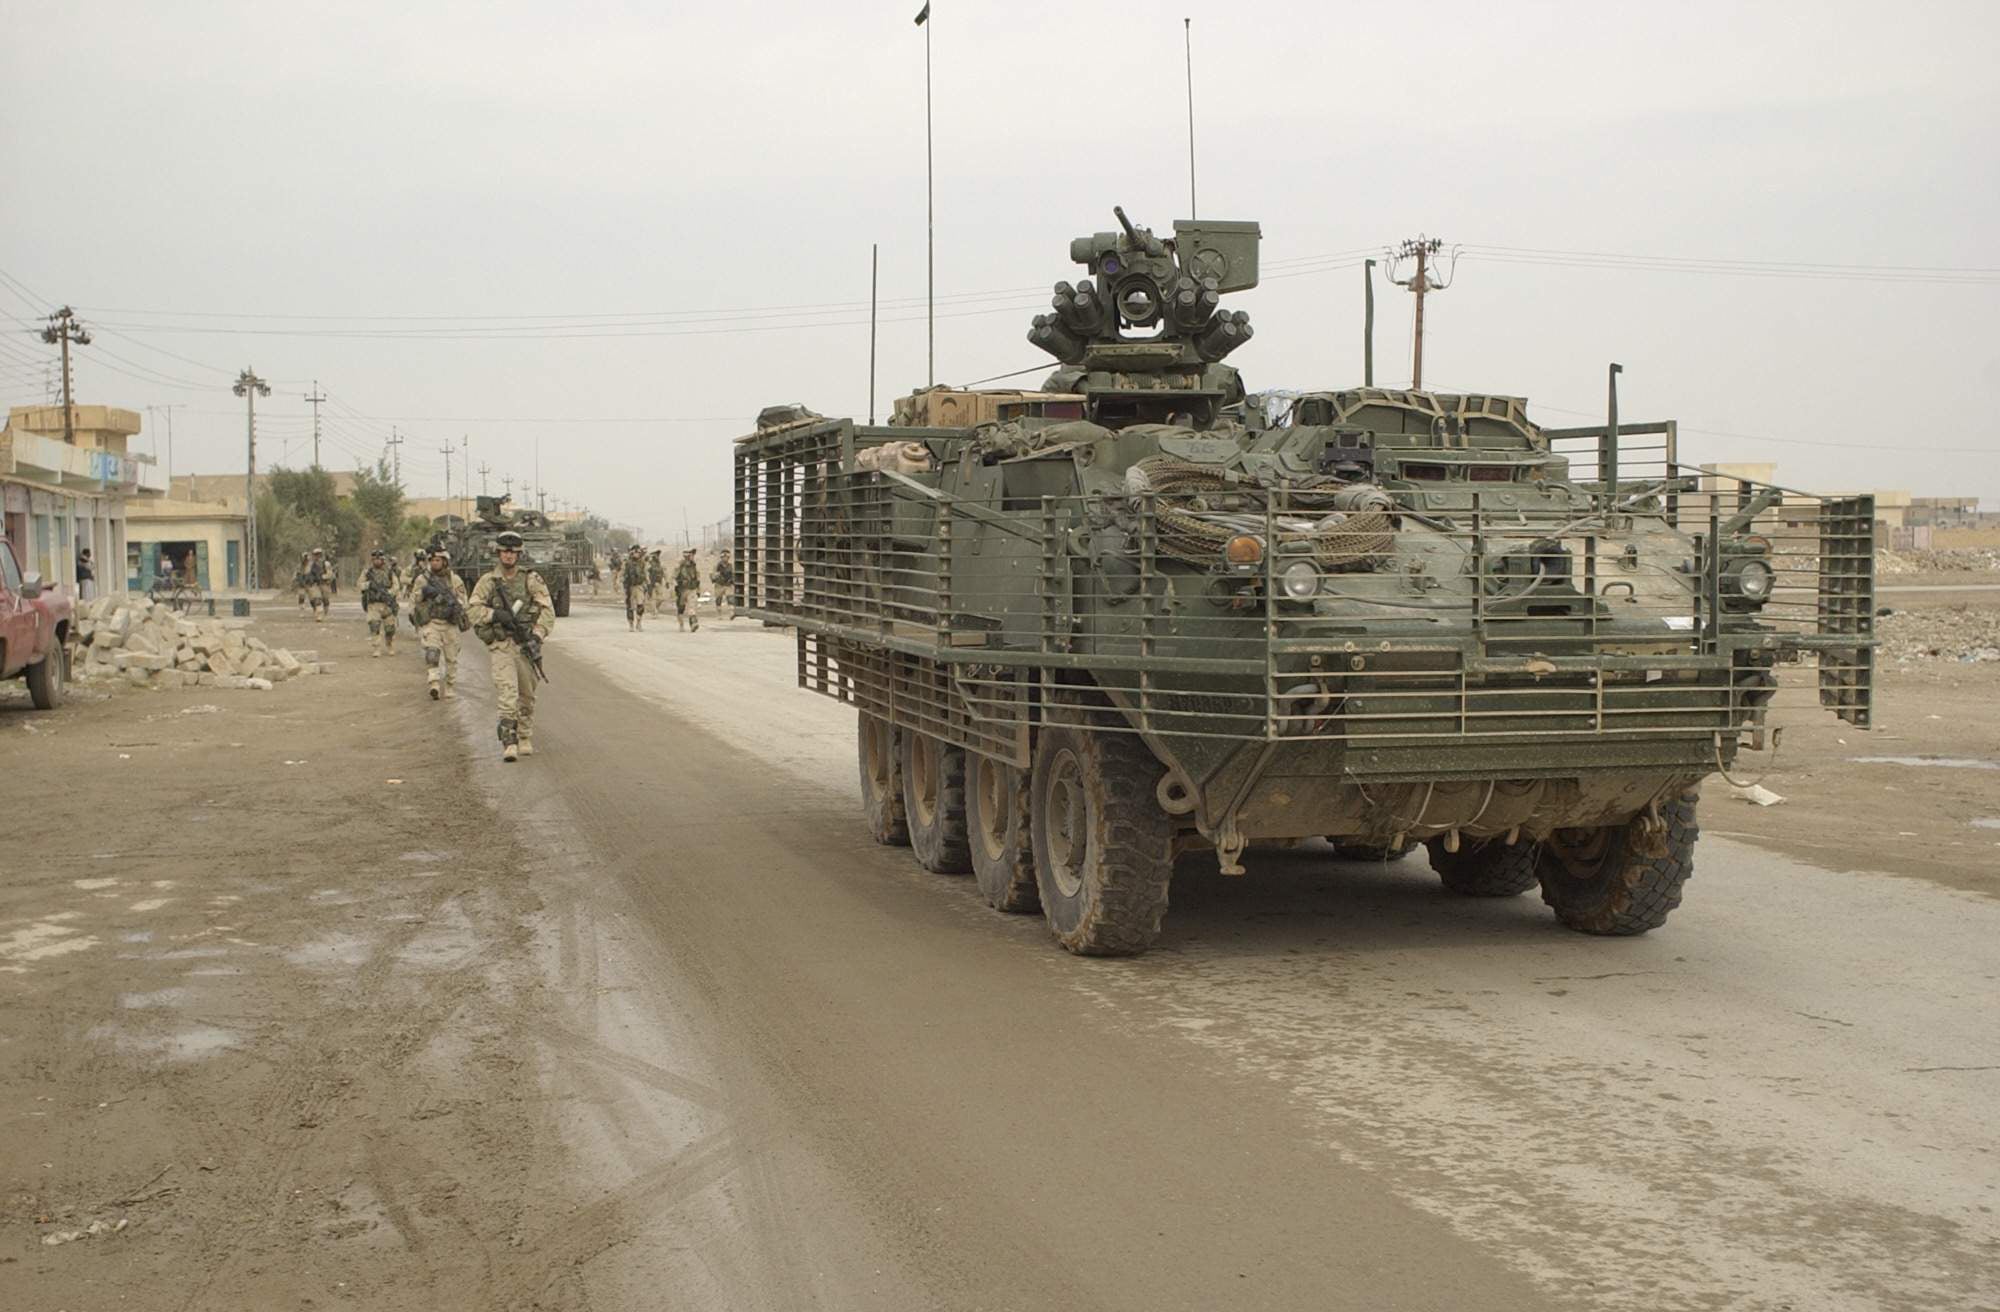 Soldiers of Battle Company, 5th Battalion - 20 Infantry, 3rd Brigade, 2nd Infantry Division (Stryker Brigade Combat Team) conduct route reconnaissance, a presence patrol, a civilian assessment, and combat operations contributing to the stability of Samarra, Iraq on December 15, 2003.  The 3rd Brigade, 2nd Infantry Division (Stryker Brigade Combat Team) is under the operational control of the 4th Infantry Division.  (U.S. Army photo by Spc. Clinton Tarzia) (Released)